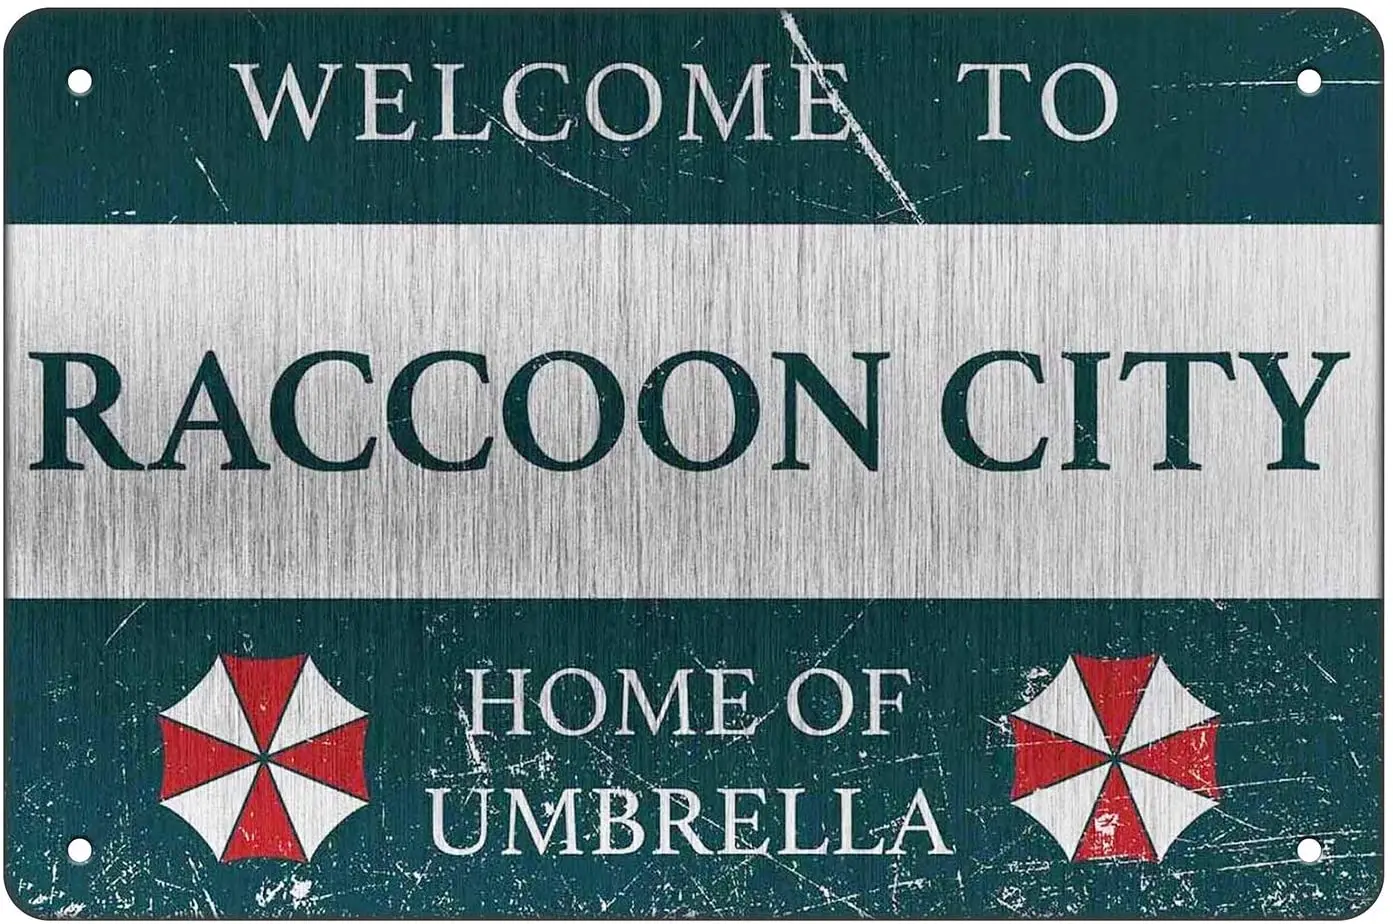 

Vintage Metal Tin Sign Personalized Welcome Sign Welcome To Raccoon City Home of Umberella Sign Door Wall Decor Style Plate